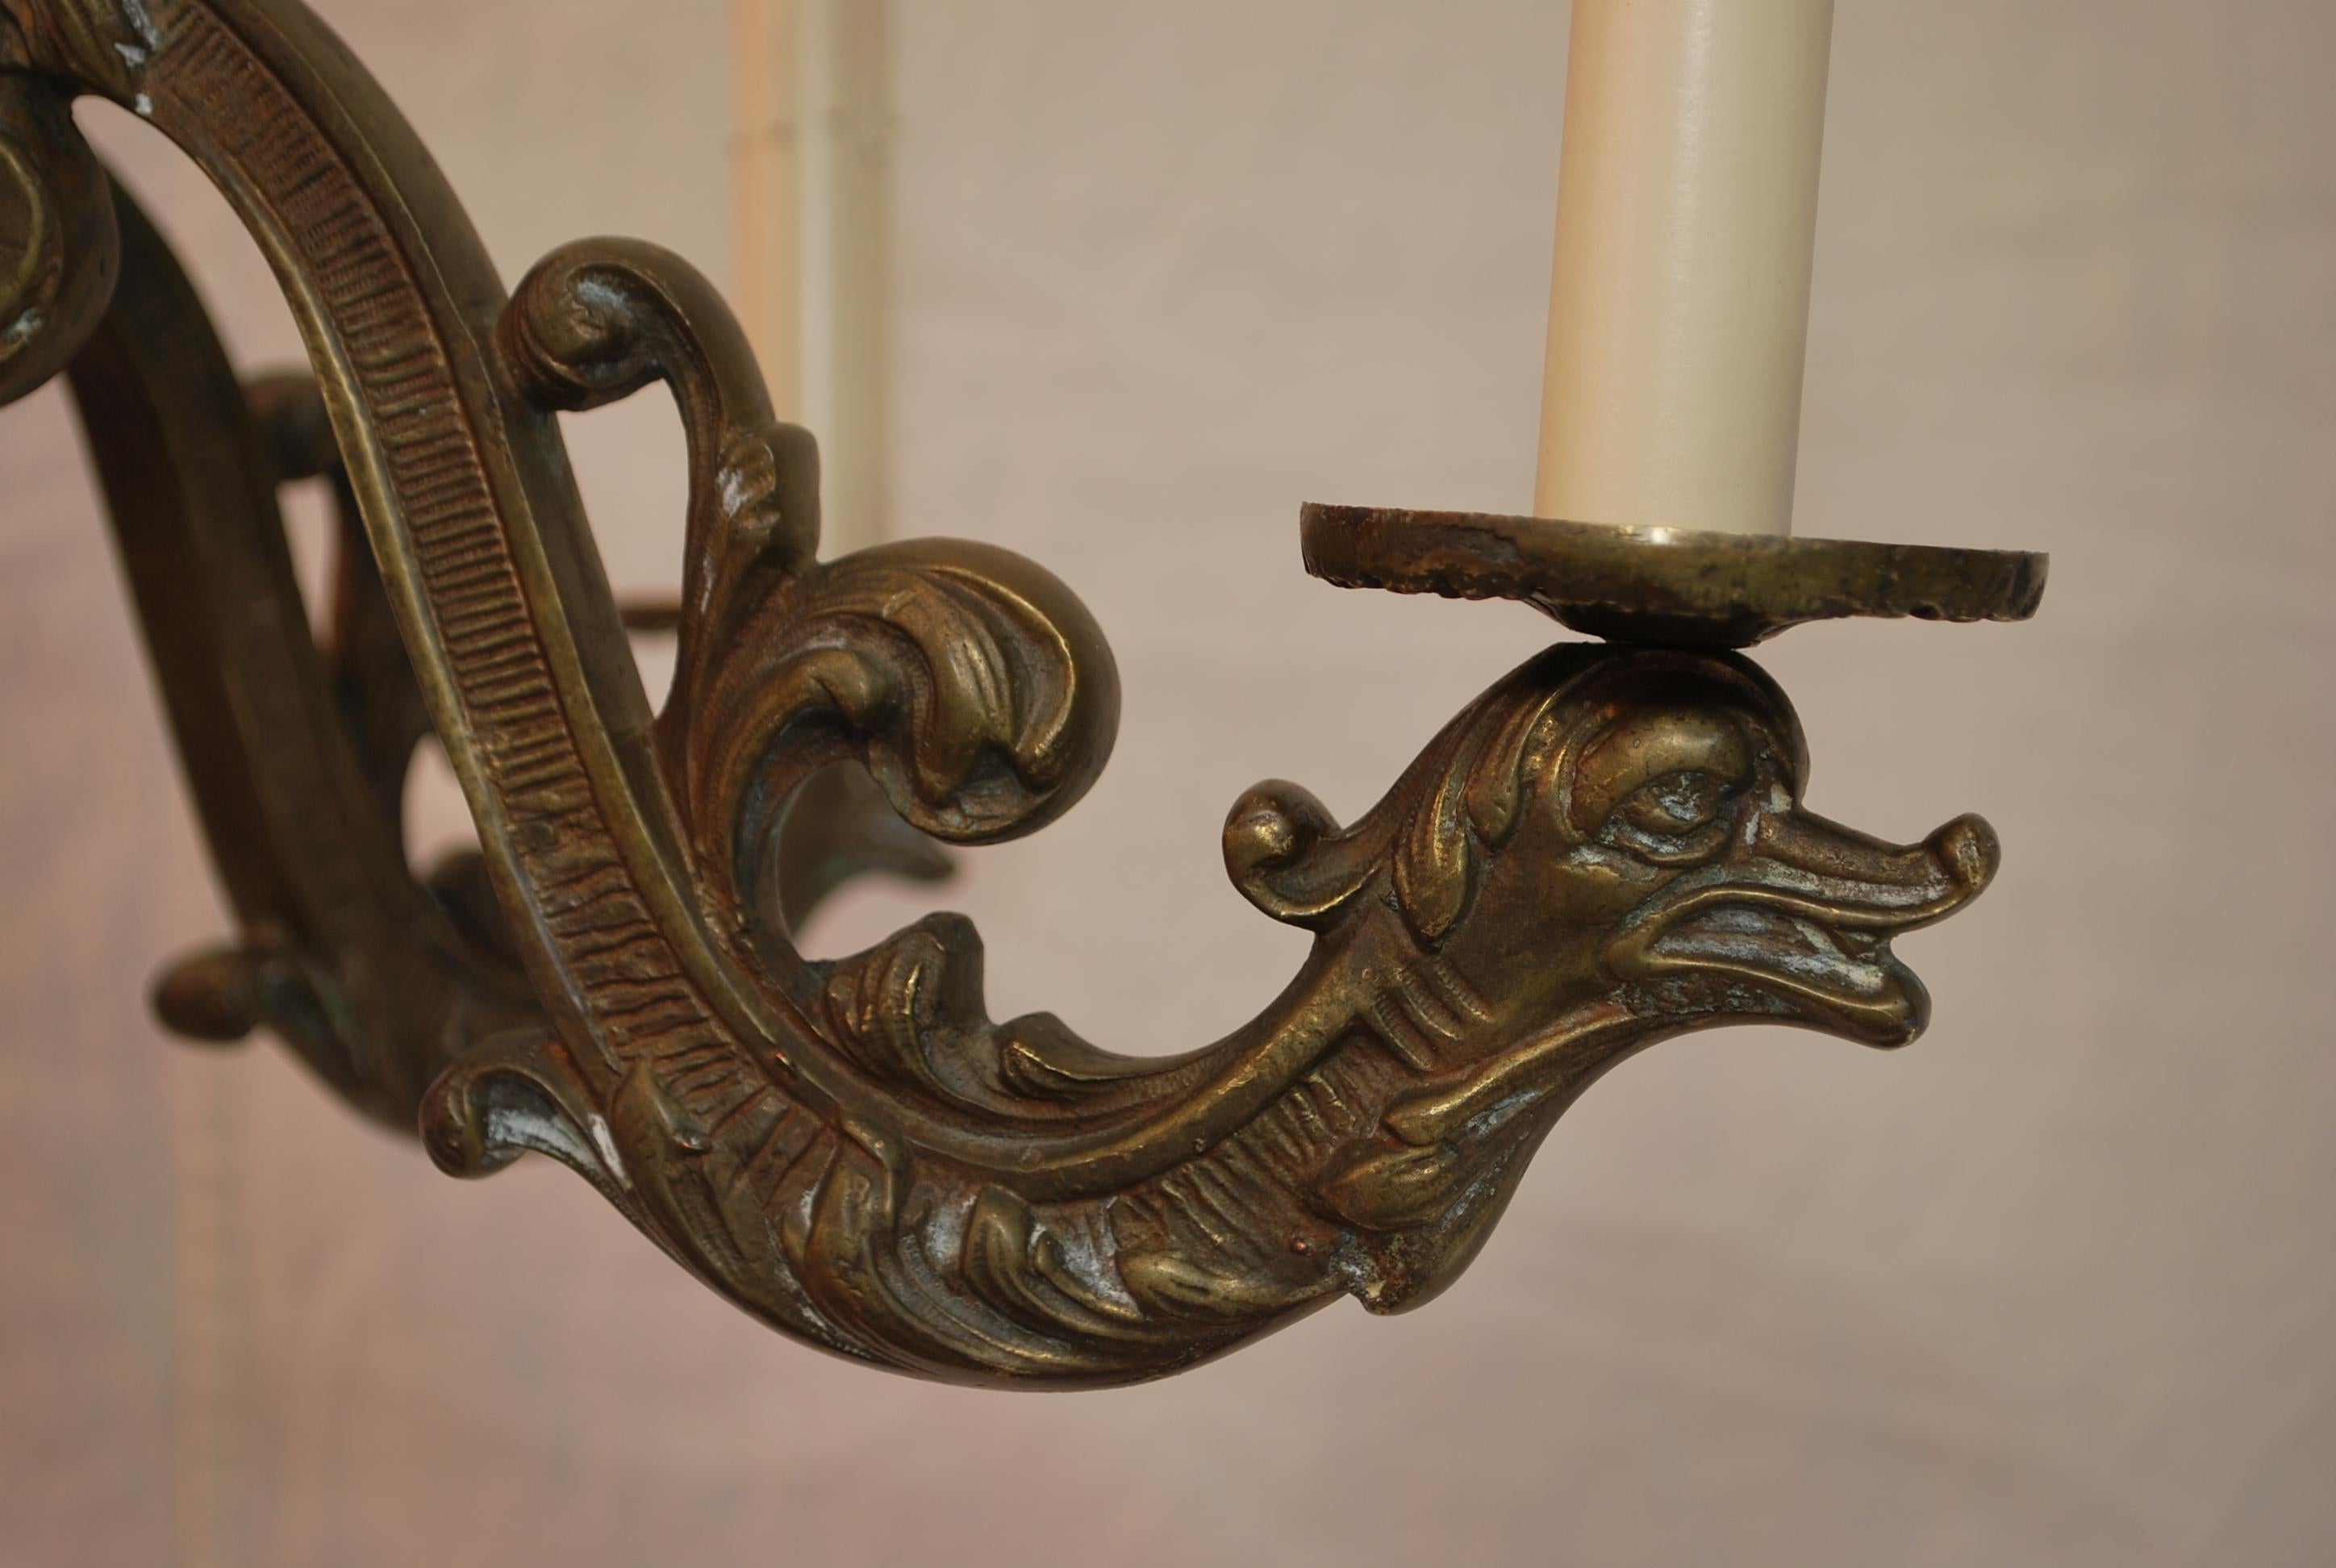 A beautiful  french solid bronze chandelier, it is decorated  with sea creatures, PLEASE REMEMBER, ON THE PICTURE IT LOOK LIKE THEY IS AN ARM THAT IS MORE REDDISH, THE CHANDELIER IS ALL THE SAME COLOR, IT IS JUST THE FLASH OF THE CAMERA MADE ONE ARM